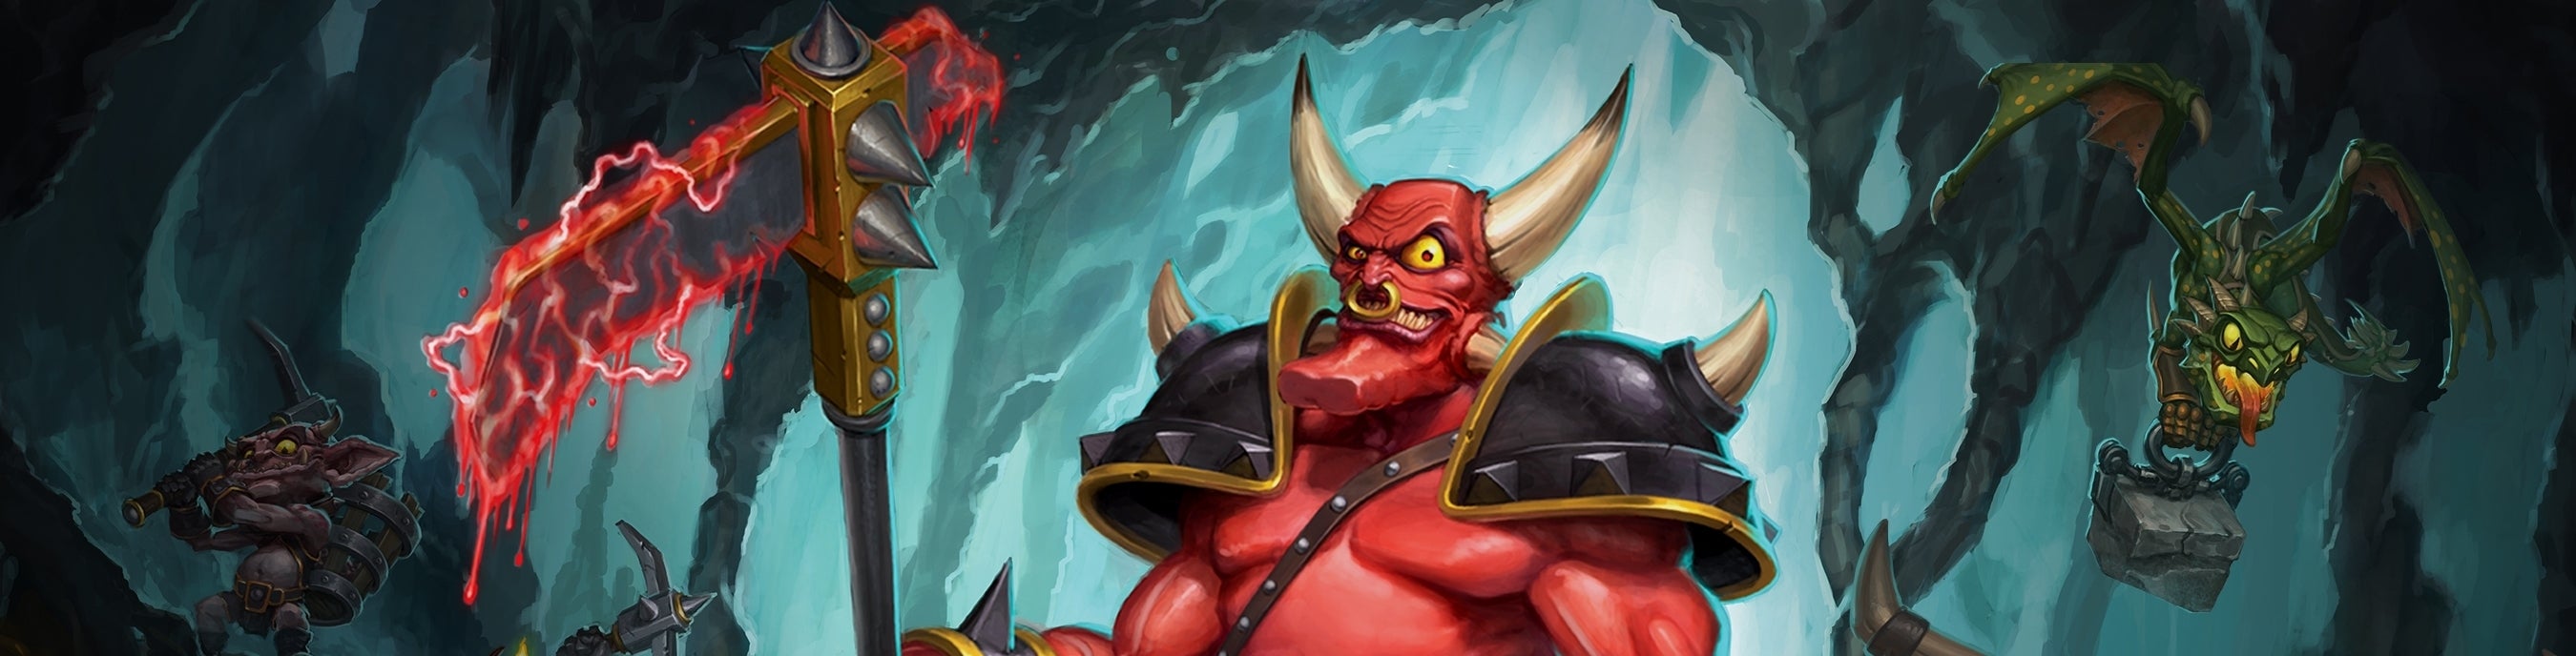 Image for Dungeon Keeper review